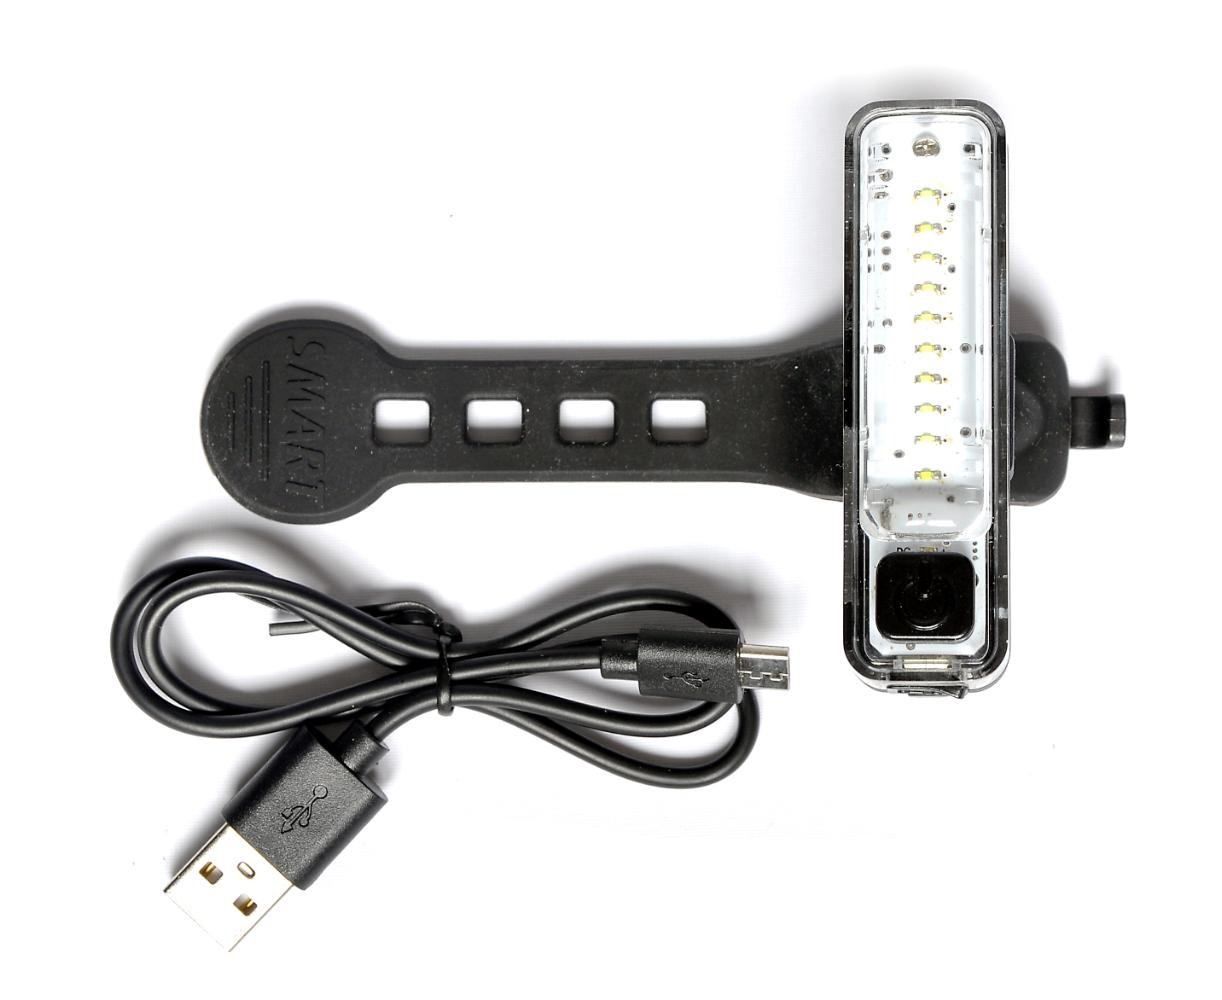 Forlygte Cykel SMART Acrux Front 7 Micro LED med USB